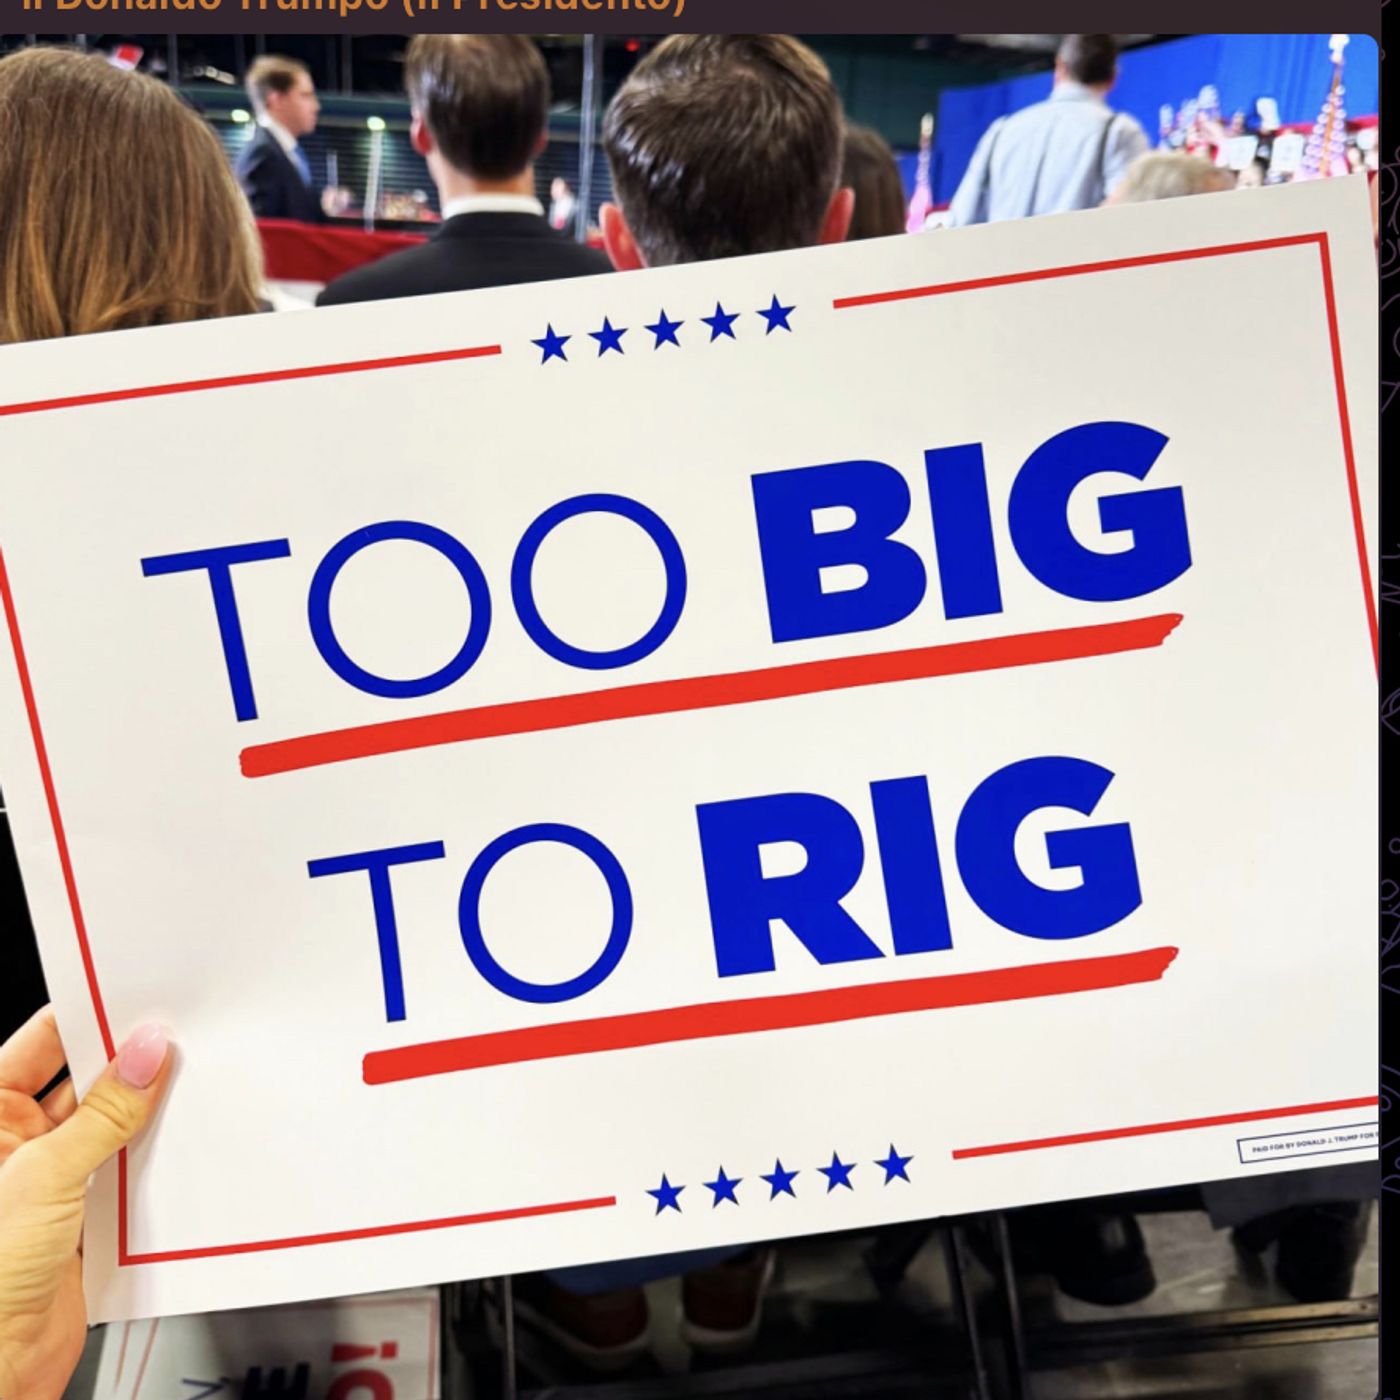 Will Trump's election be 'too big to rig'?